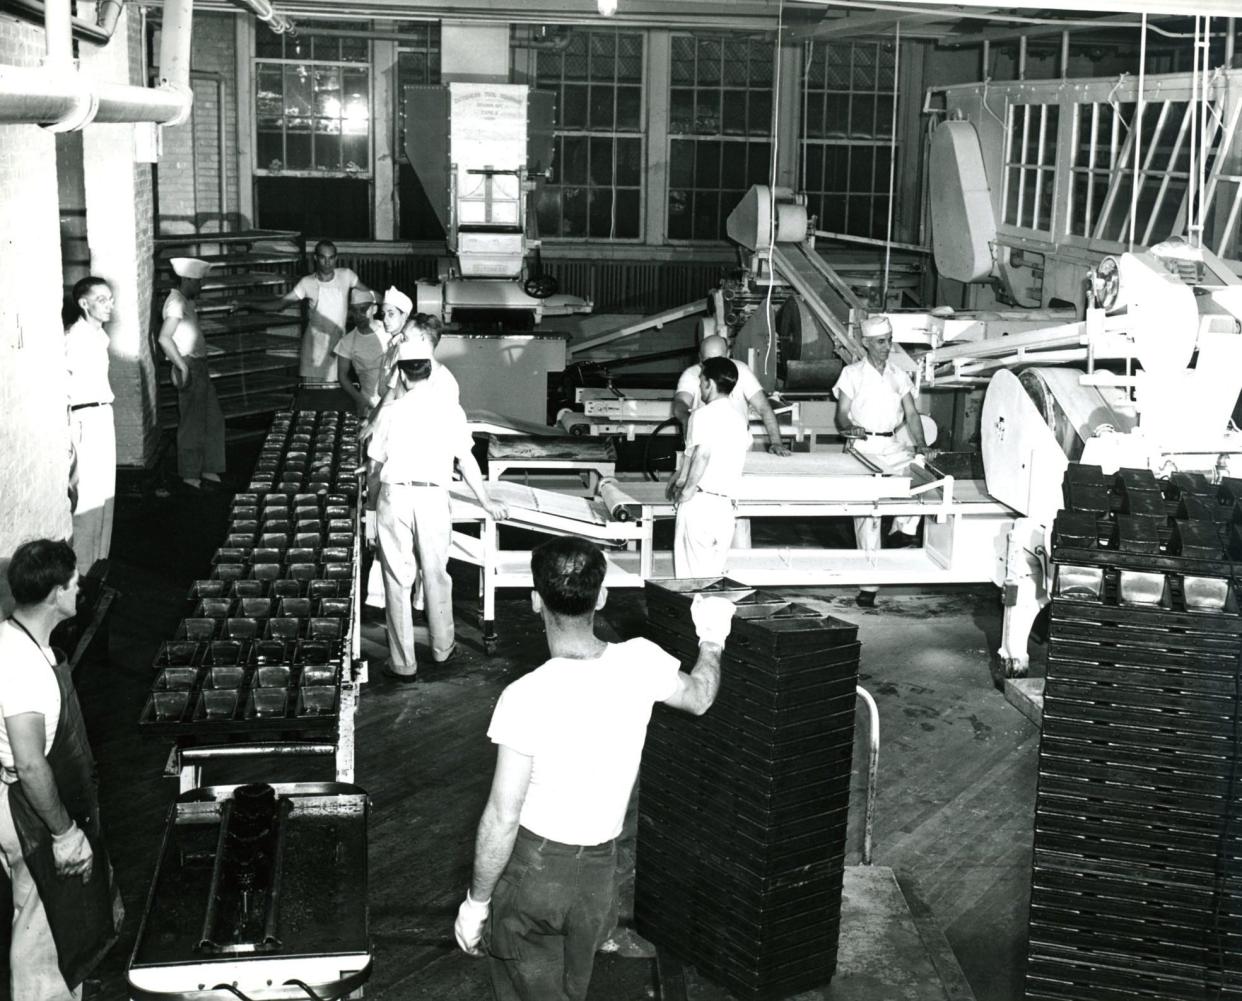 Workers make Wonder Bread at the Continental Baking Co. in 1946 at 178 S. Forge St. in Akron.